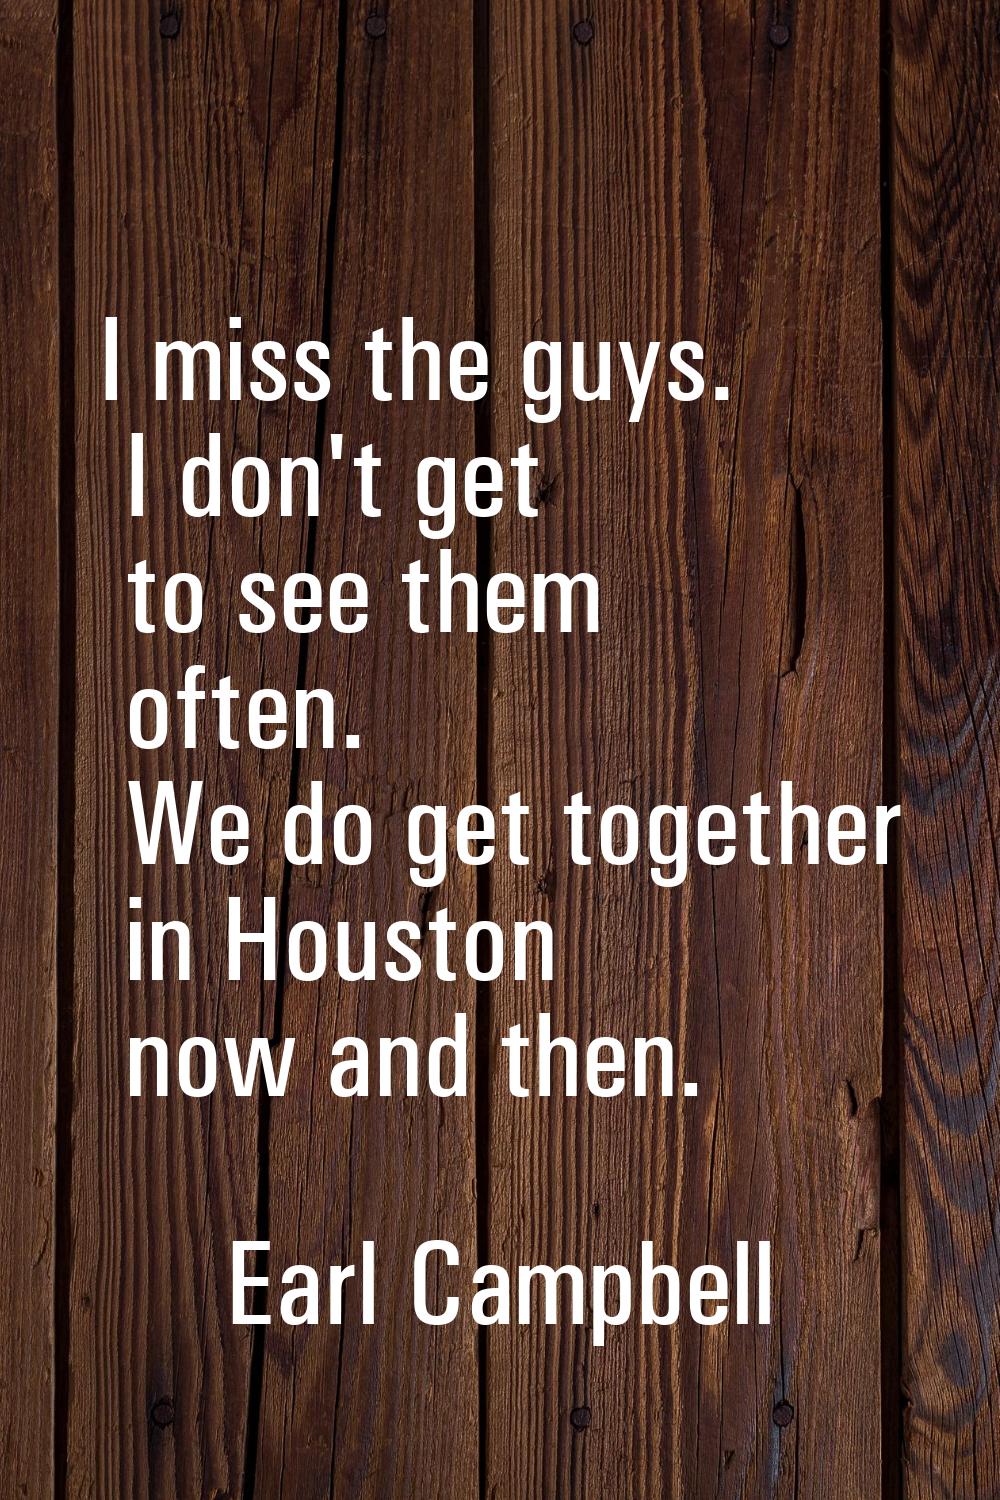 I miss the guys. I don't get to see them often. We do get together in Houston now and then.